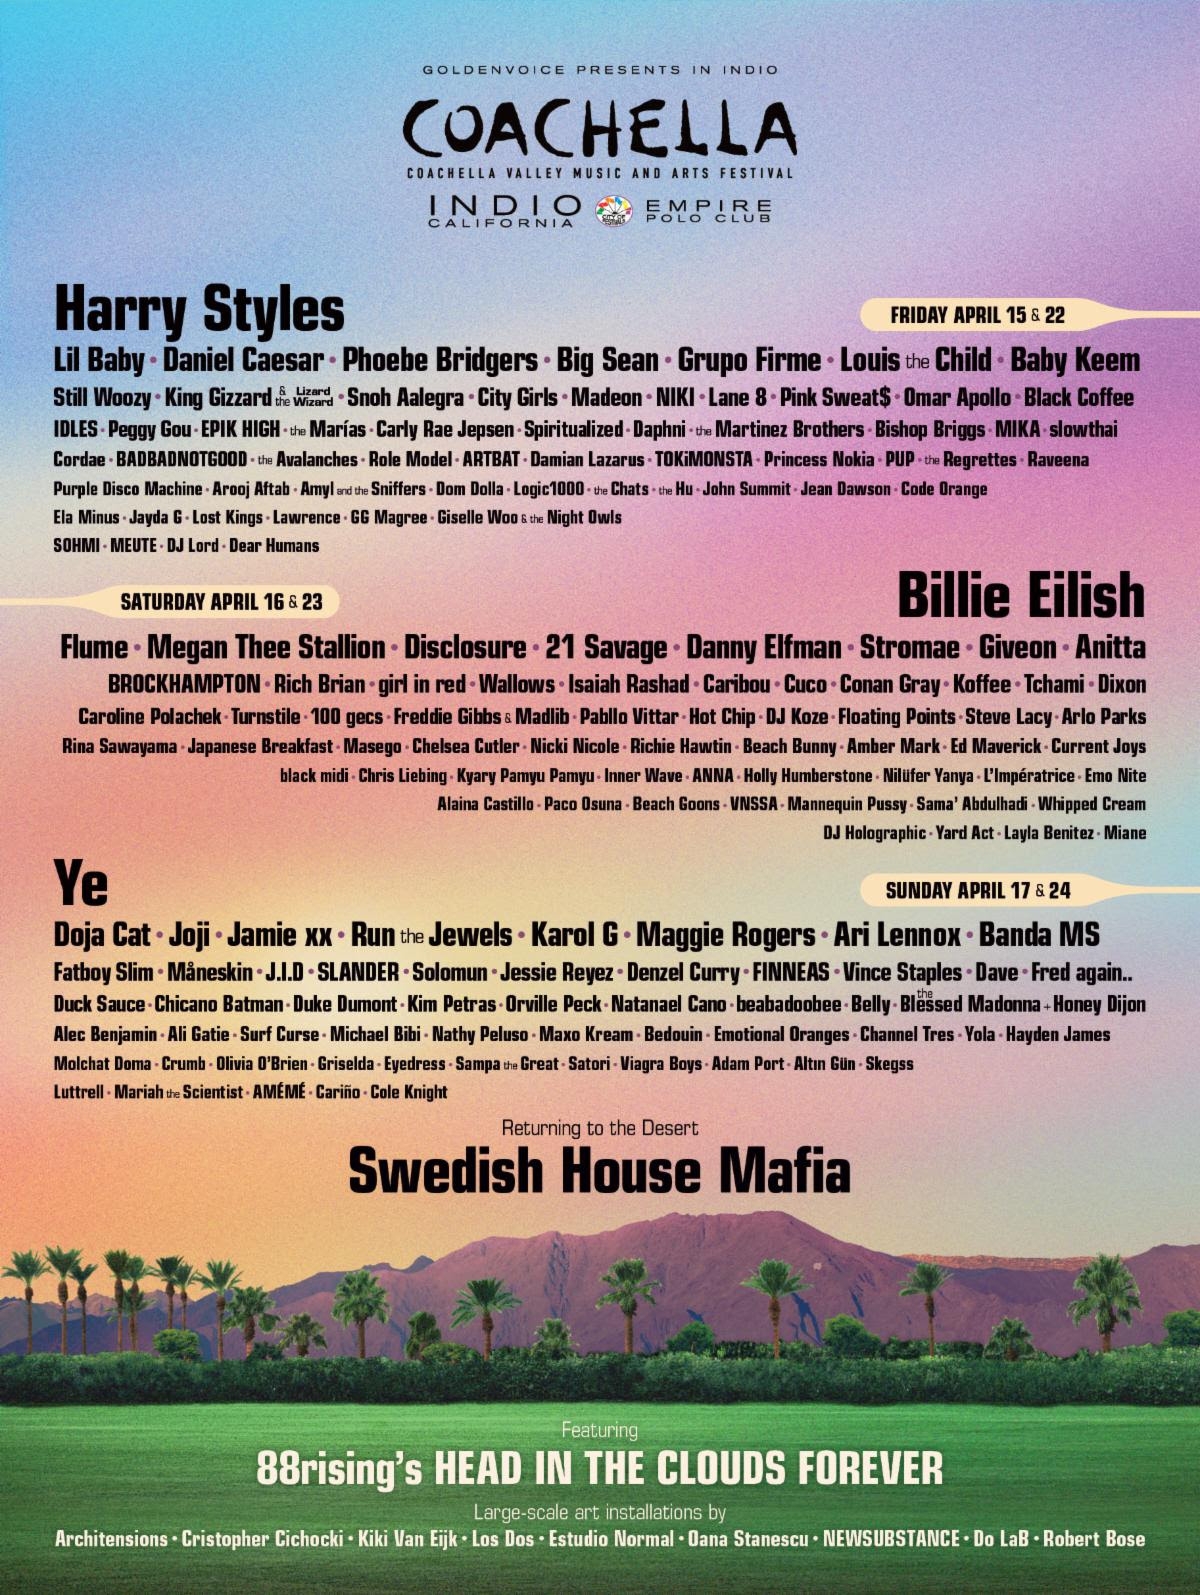 Here’s the full Coachella schedule, featuring Harry Styles, Billie Eilish, and Kanye